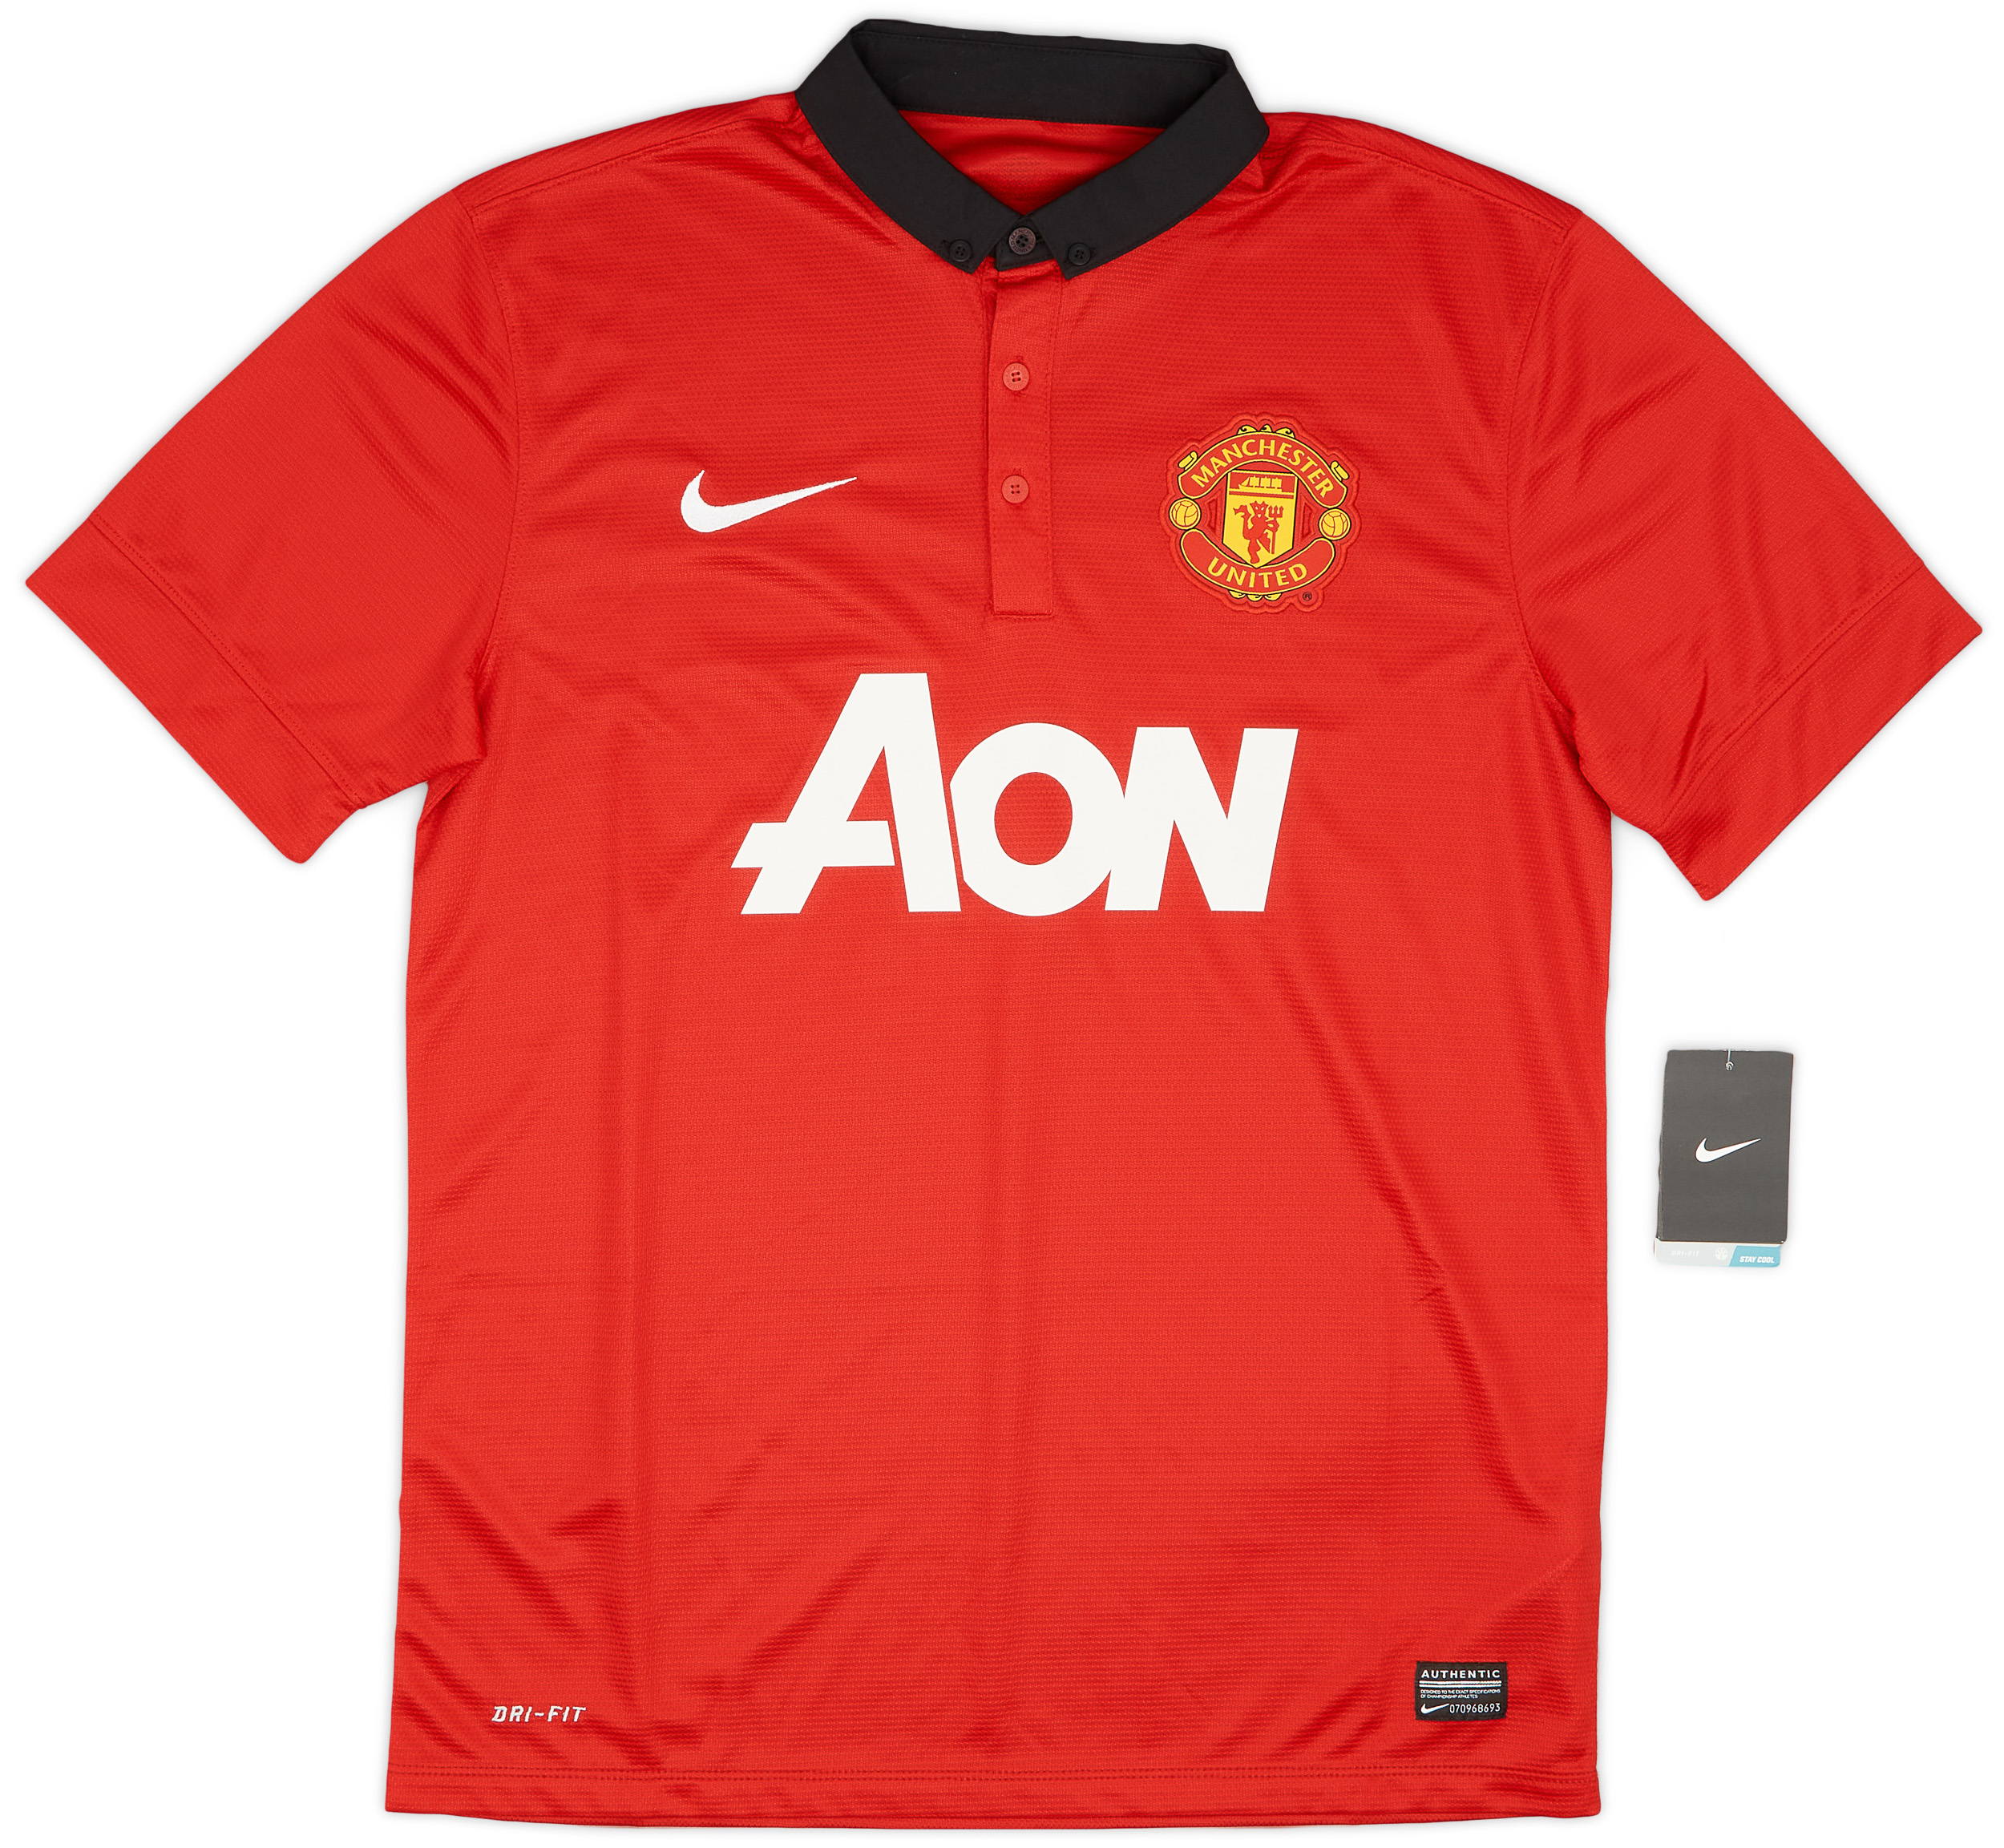 2013-14 Manchester United Home Shirt ()